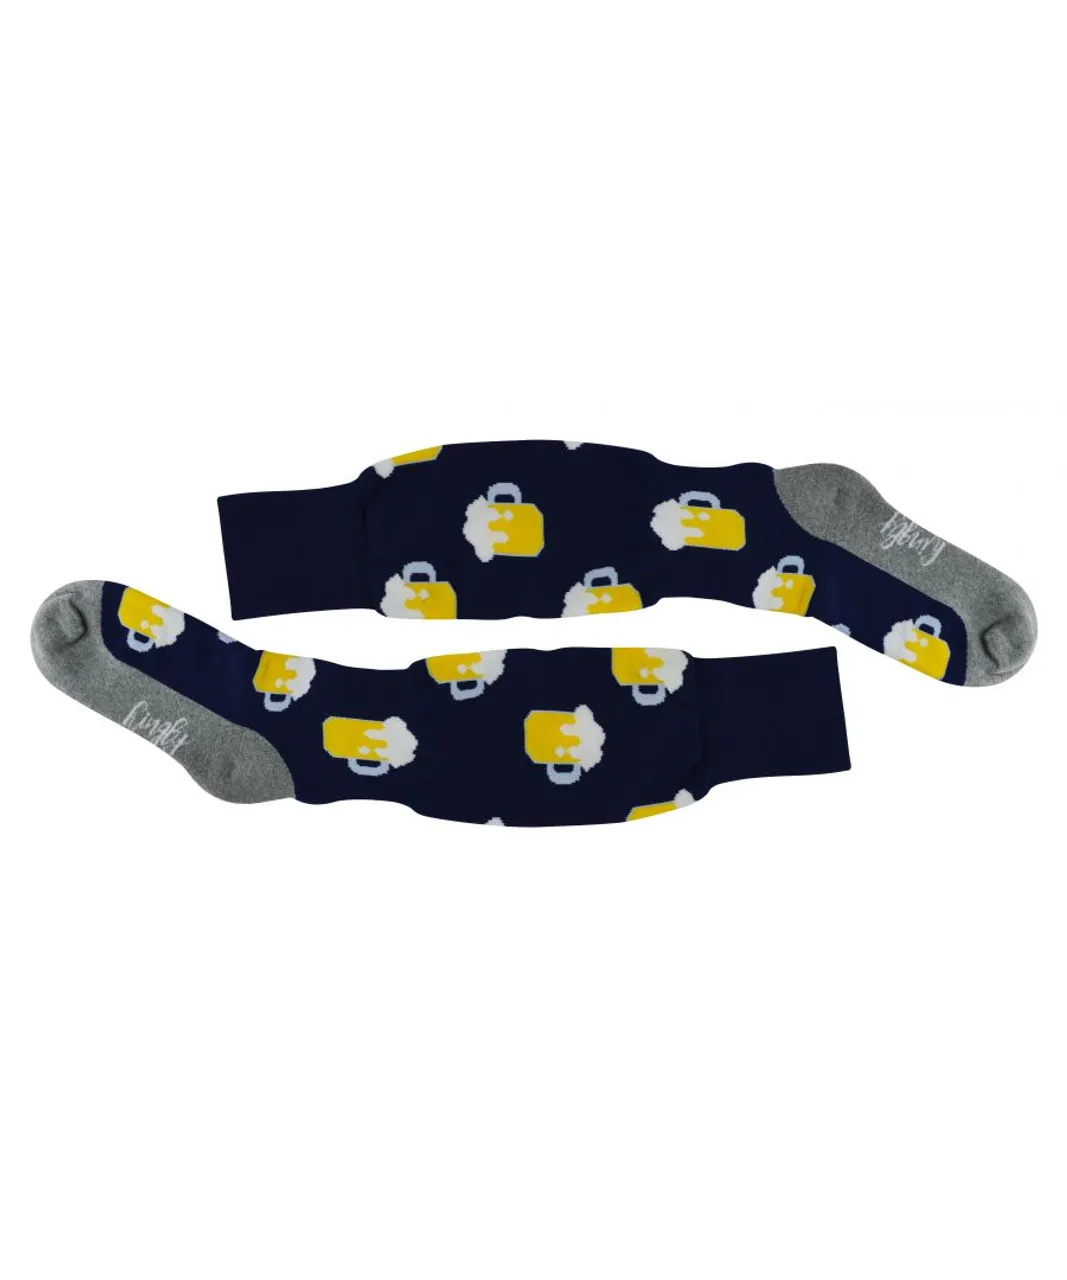 Hingly Hockey Socks with Colourful Cool Funny Funky Designs